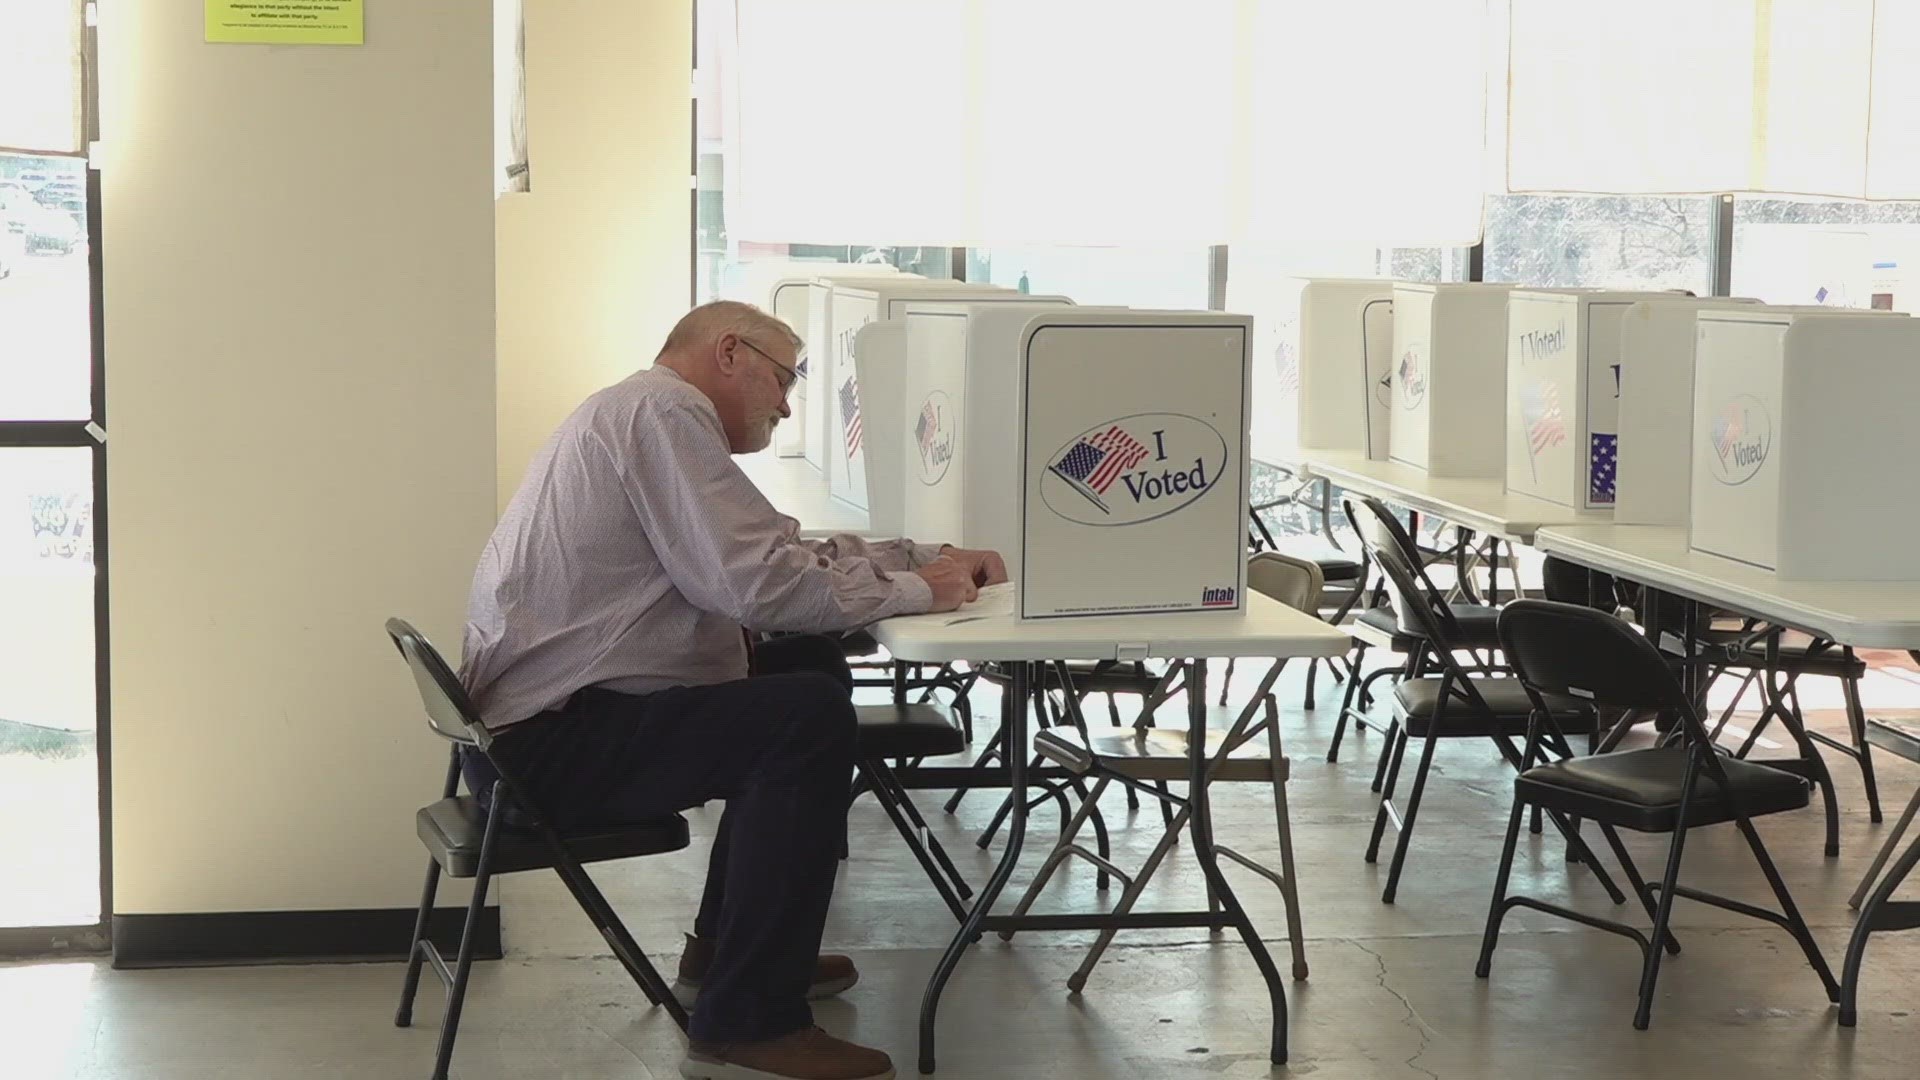 Voters will pick from county local offices as well as delegates representing presidential candidates.